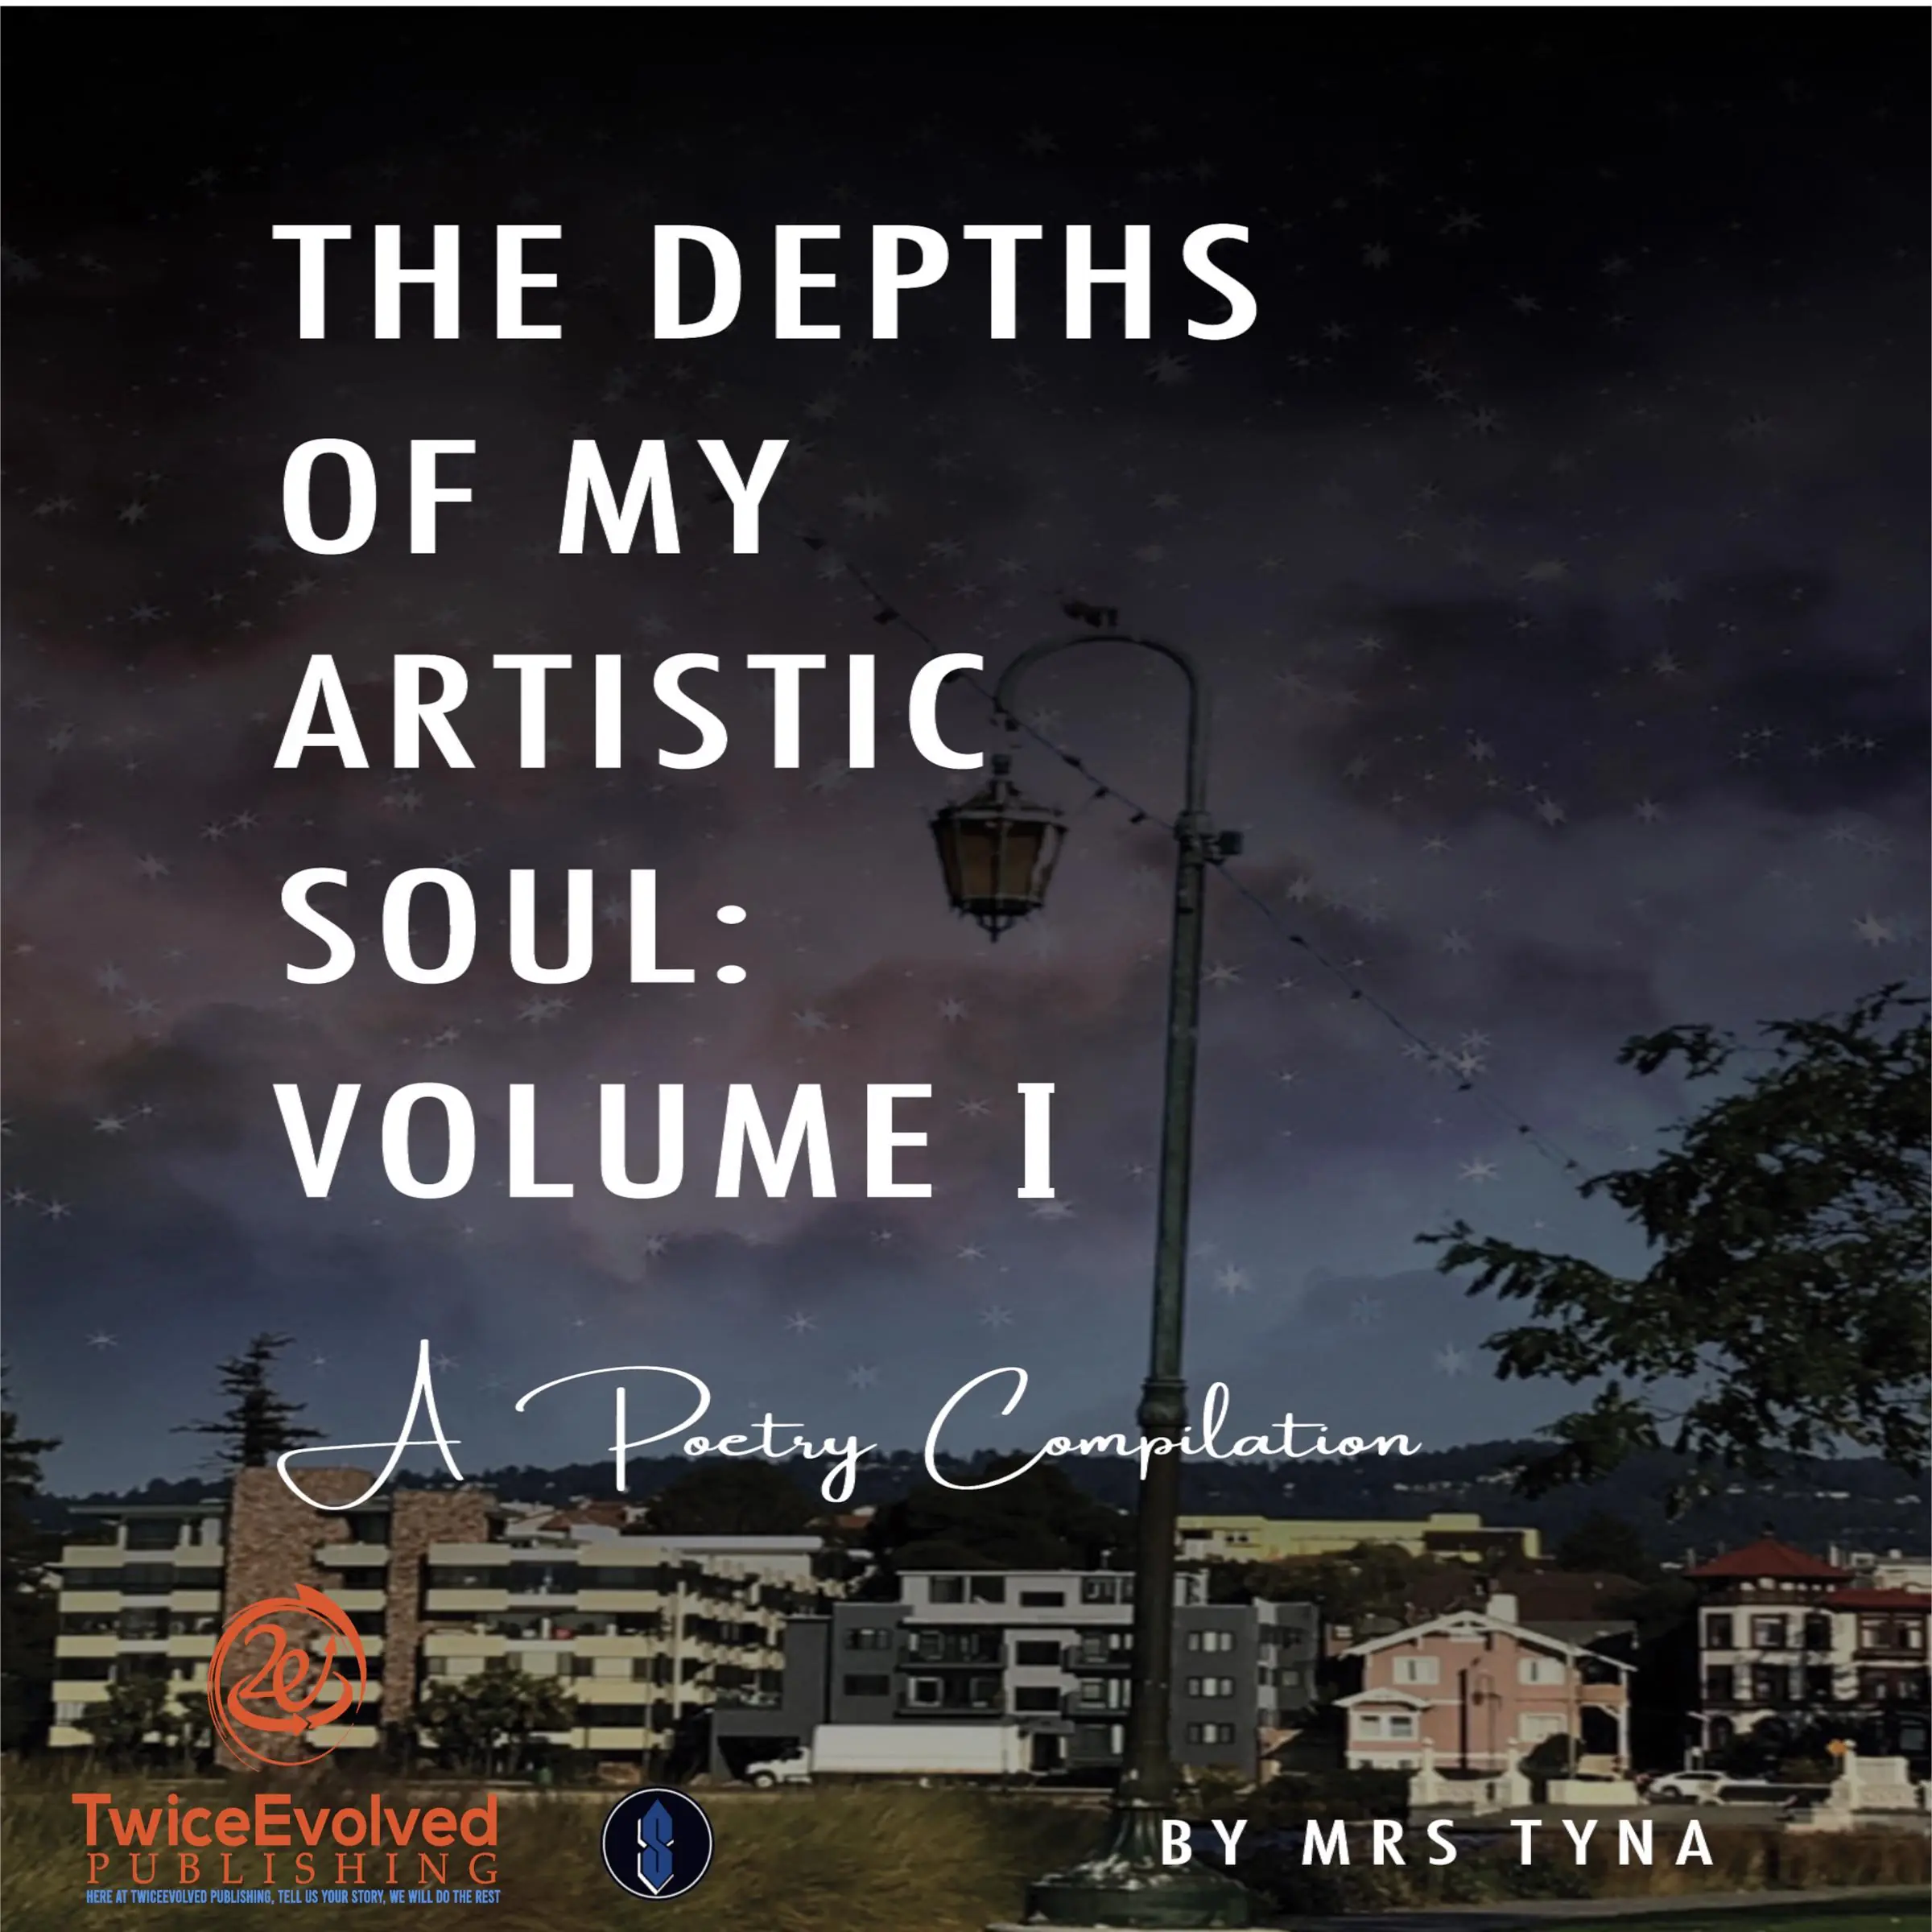 The Depths Of My Artistic Soul: Vol. I by Mrs. Tyna